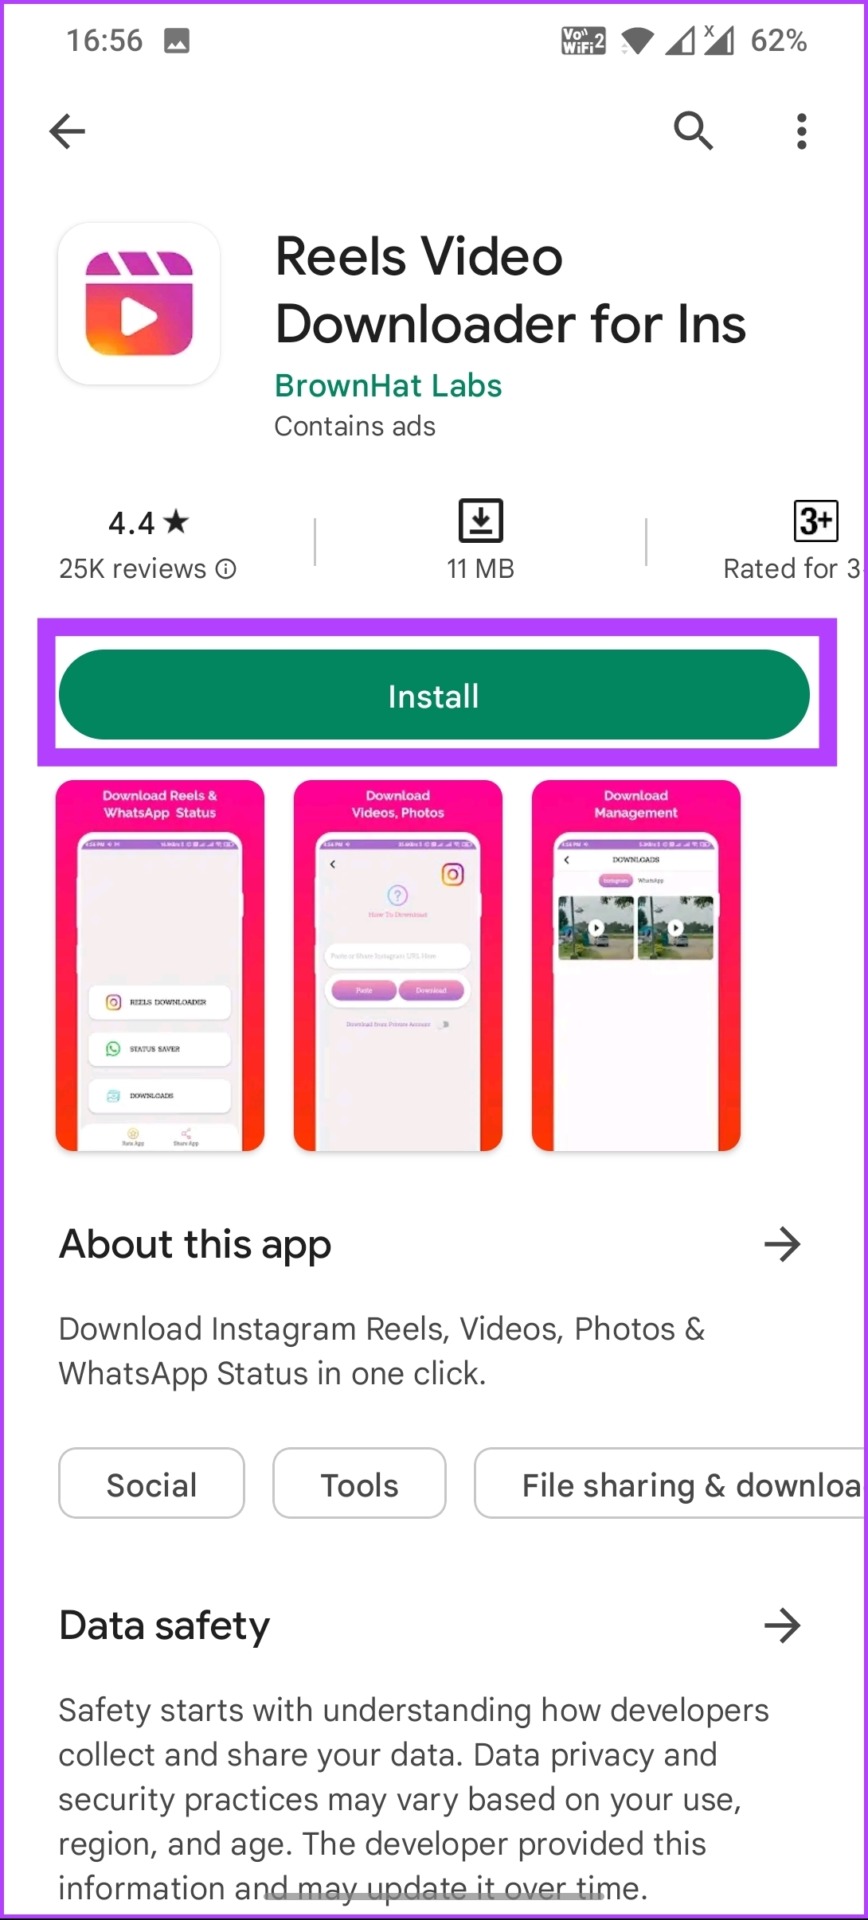 search for the app on the Play Store and install it